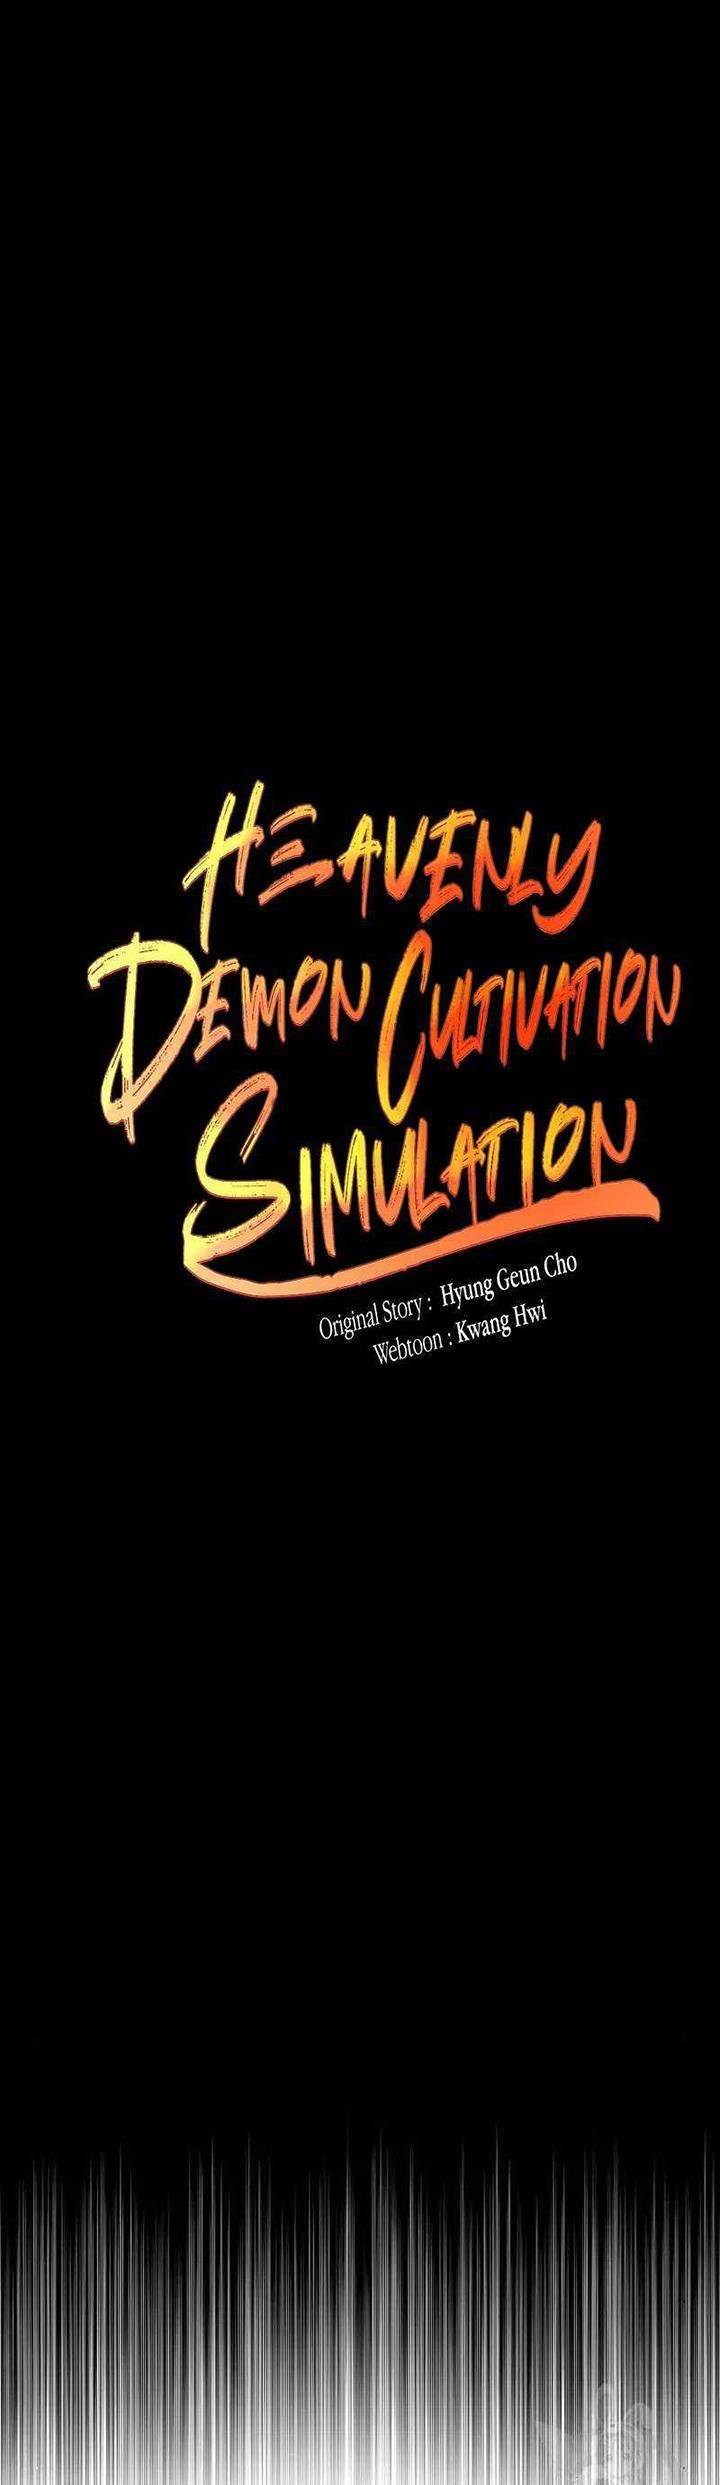 Heavenly Demon Cultivation Simulation Chapter 98